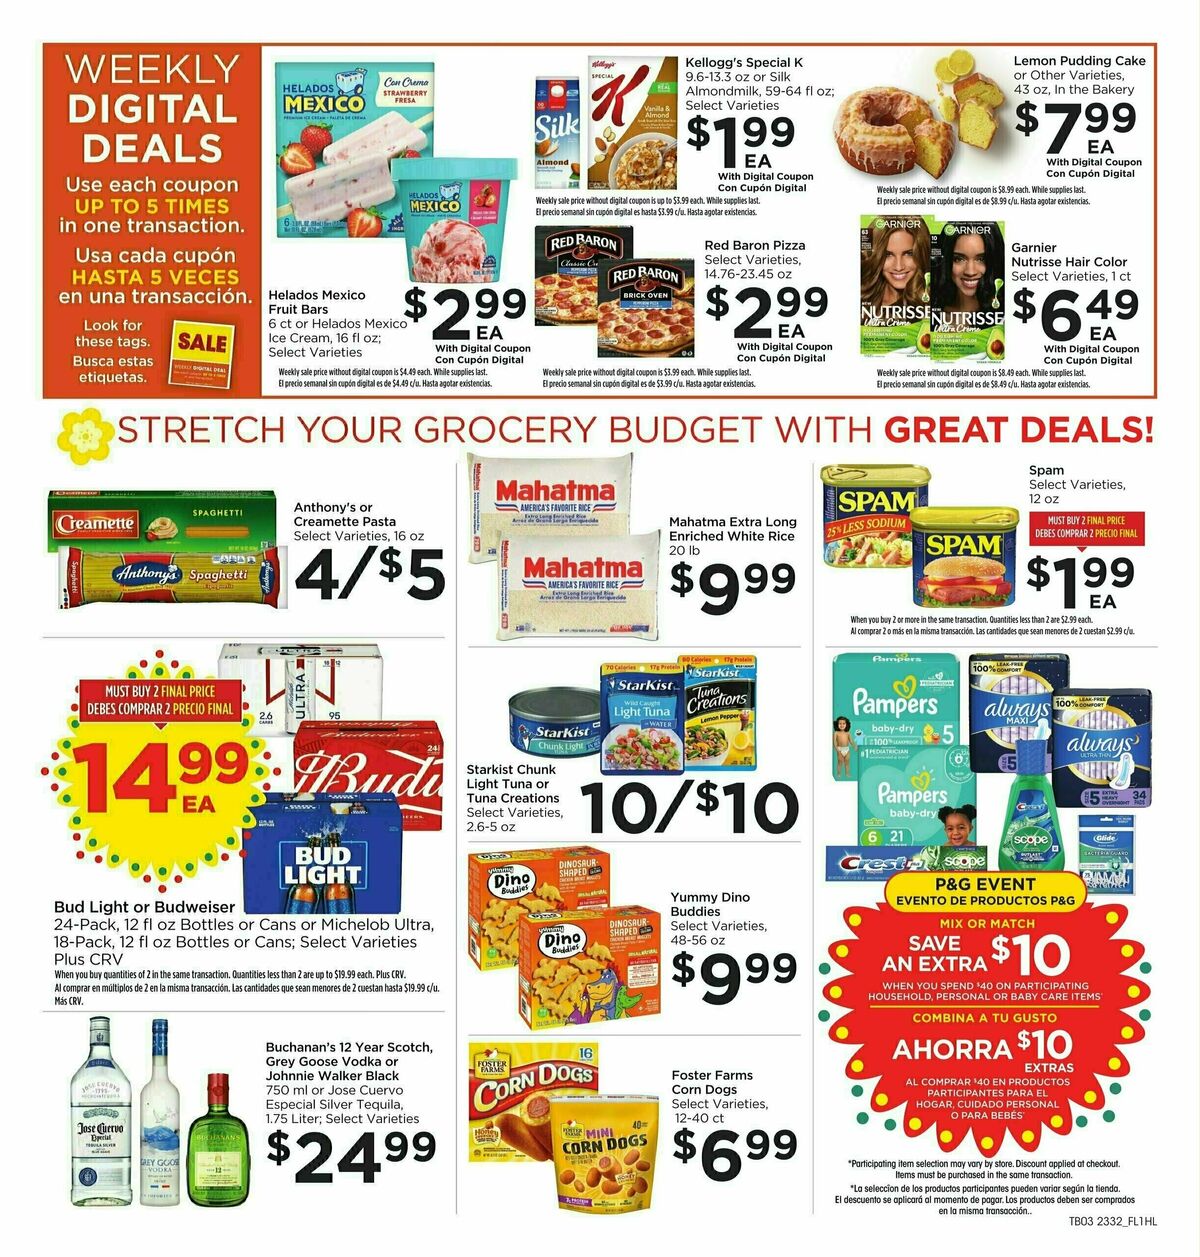 Food 4 Less Weekly Ad from September 6